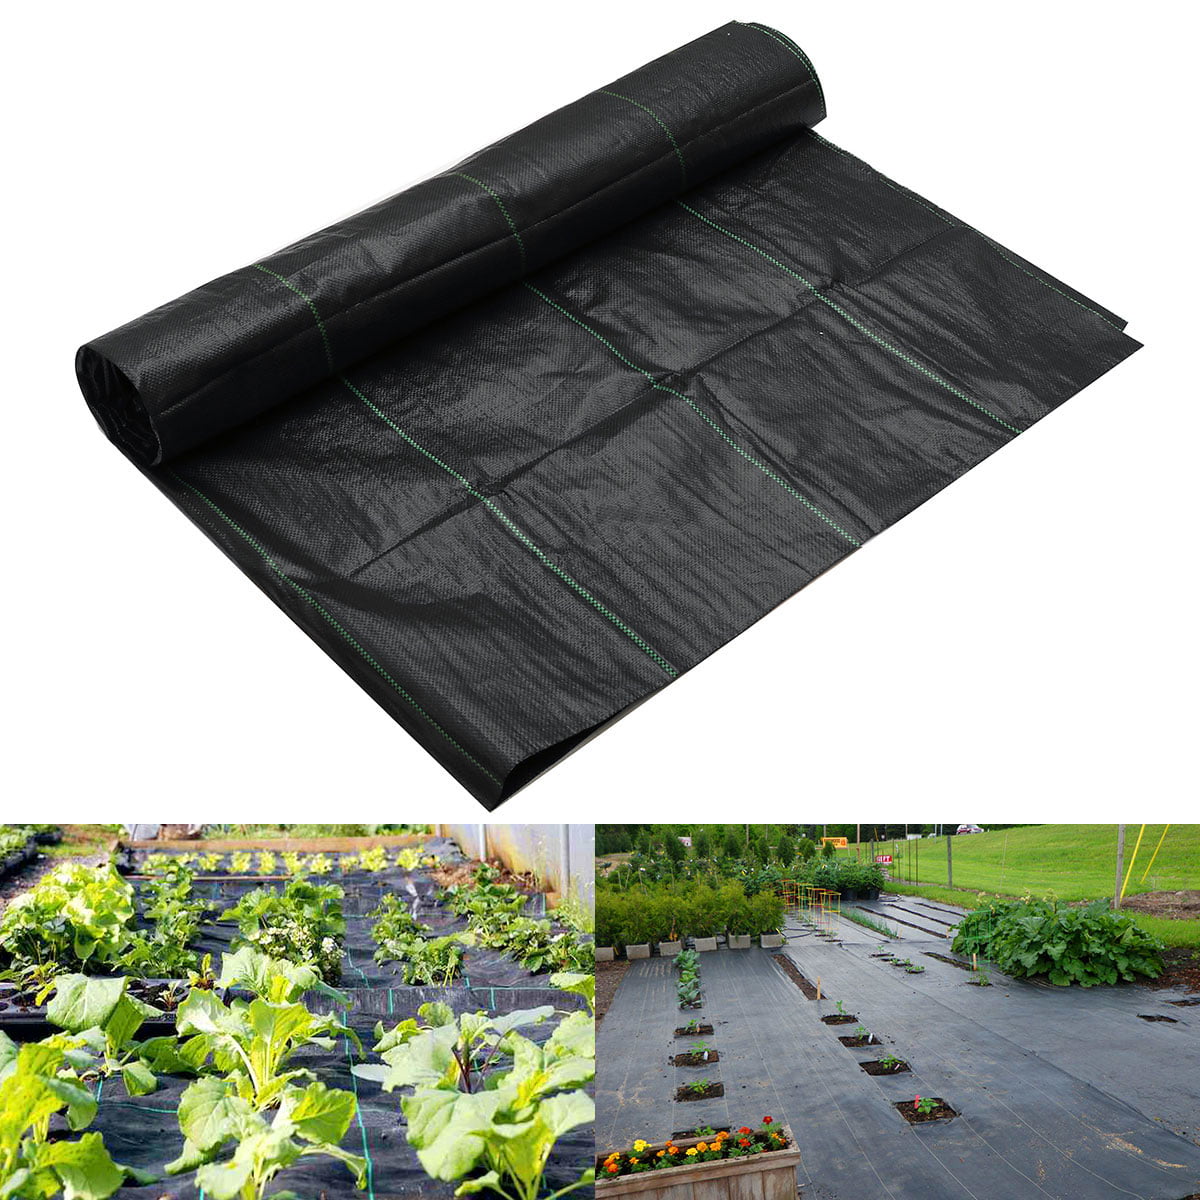 Landscape Ground Weed Control Mat Gardening Cover Barrier Heavy Duty Matting New 